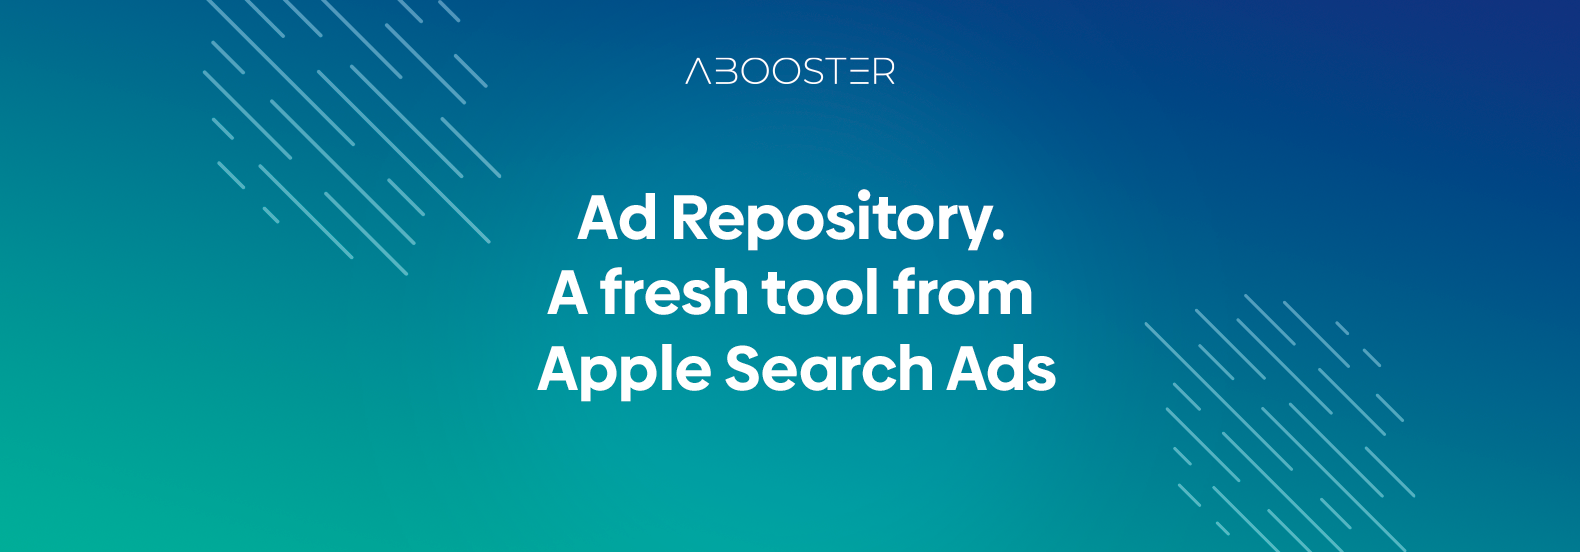 Ad Repository. A fresh tool from Apple Search Ads